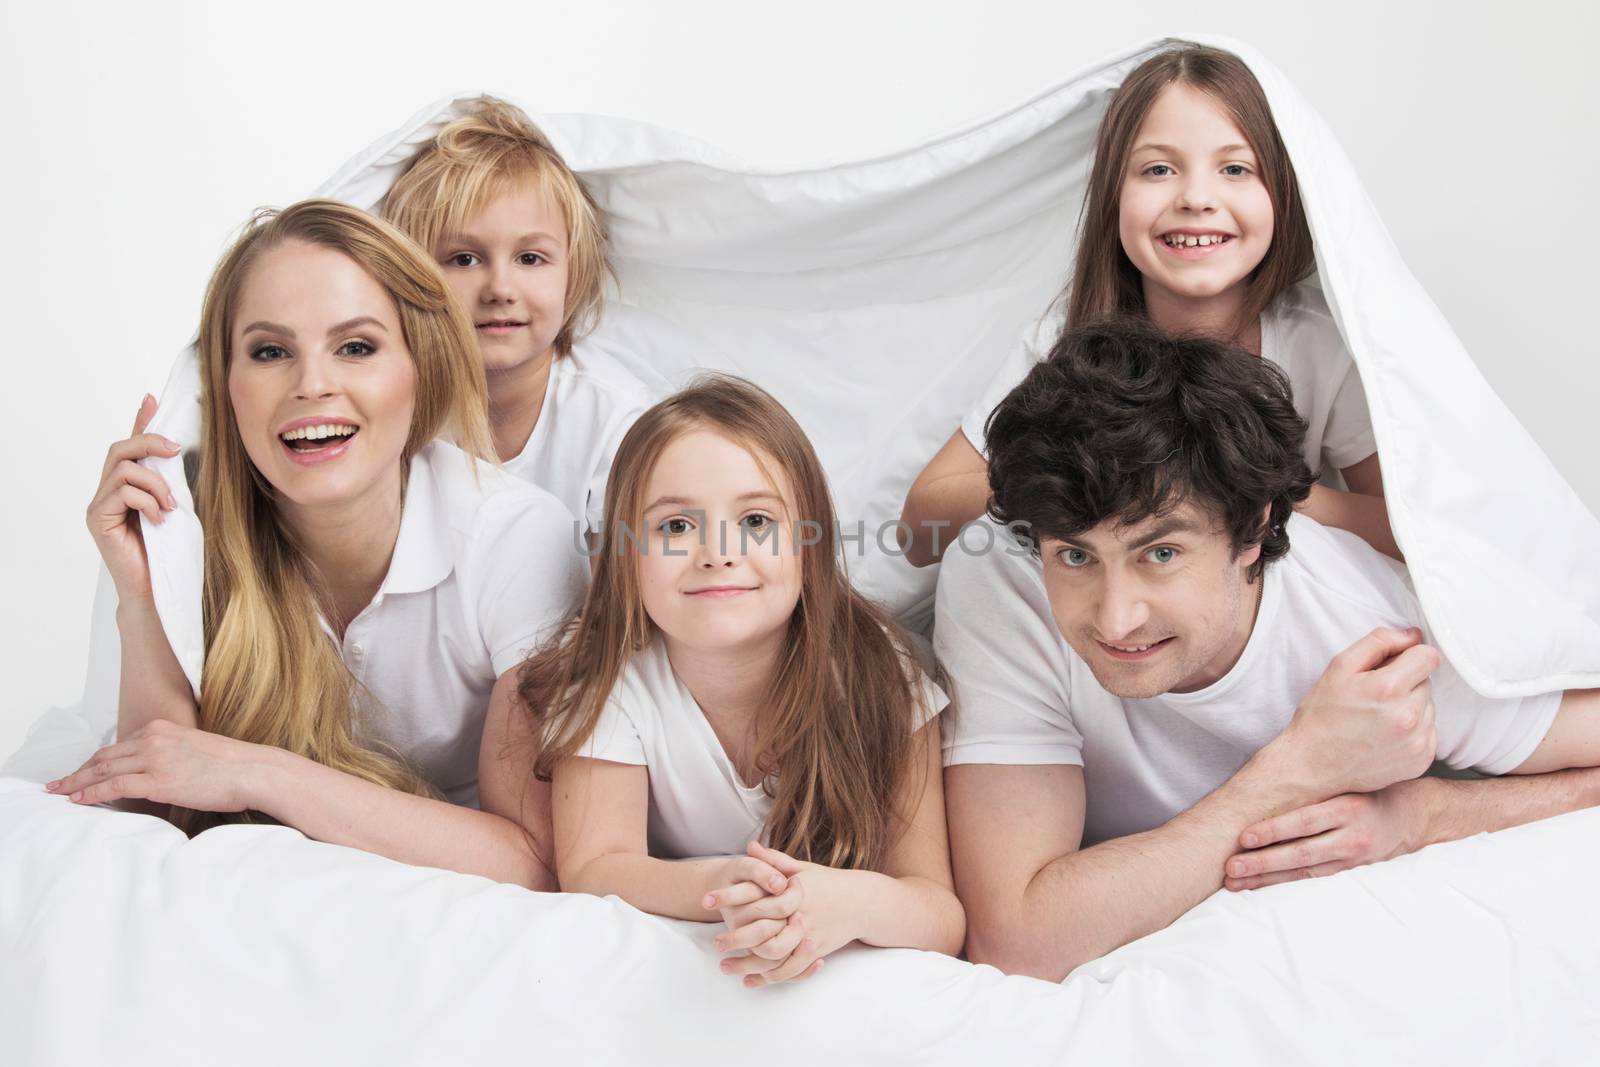 Smiling family with three children wake up in bed